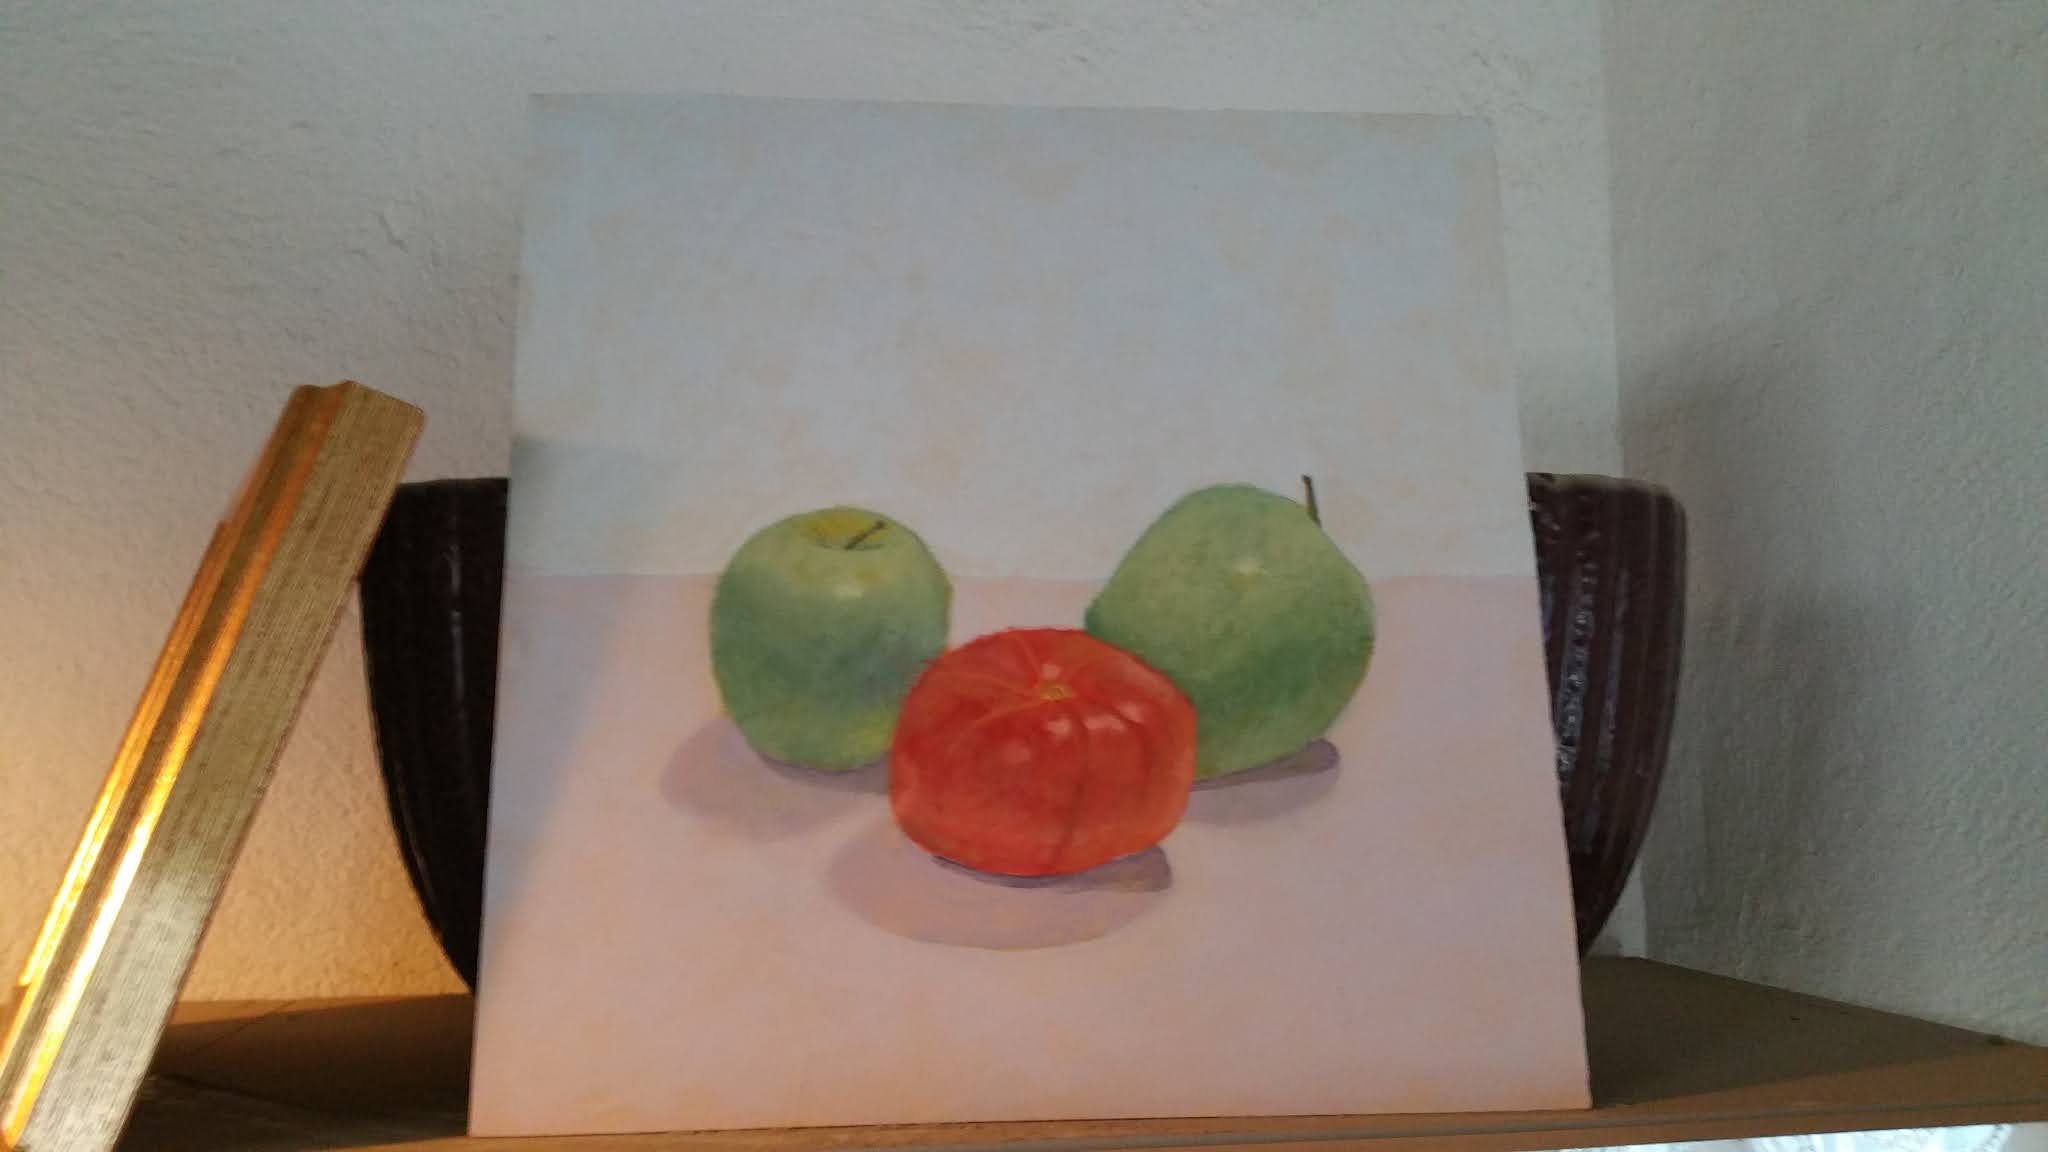 green apples and a tomato